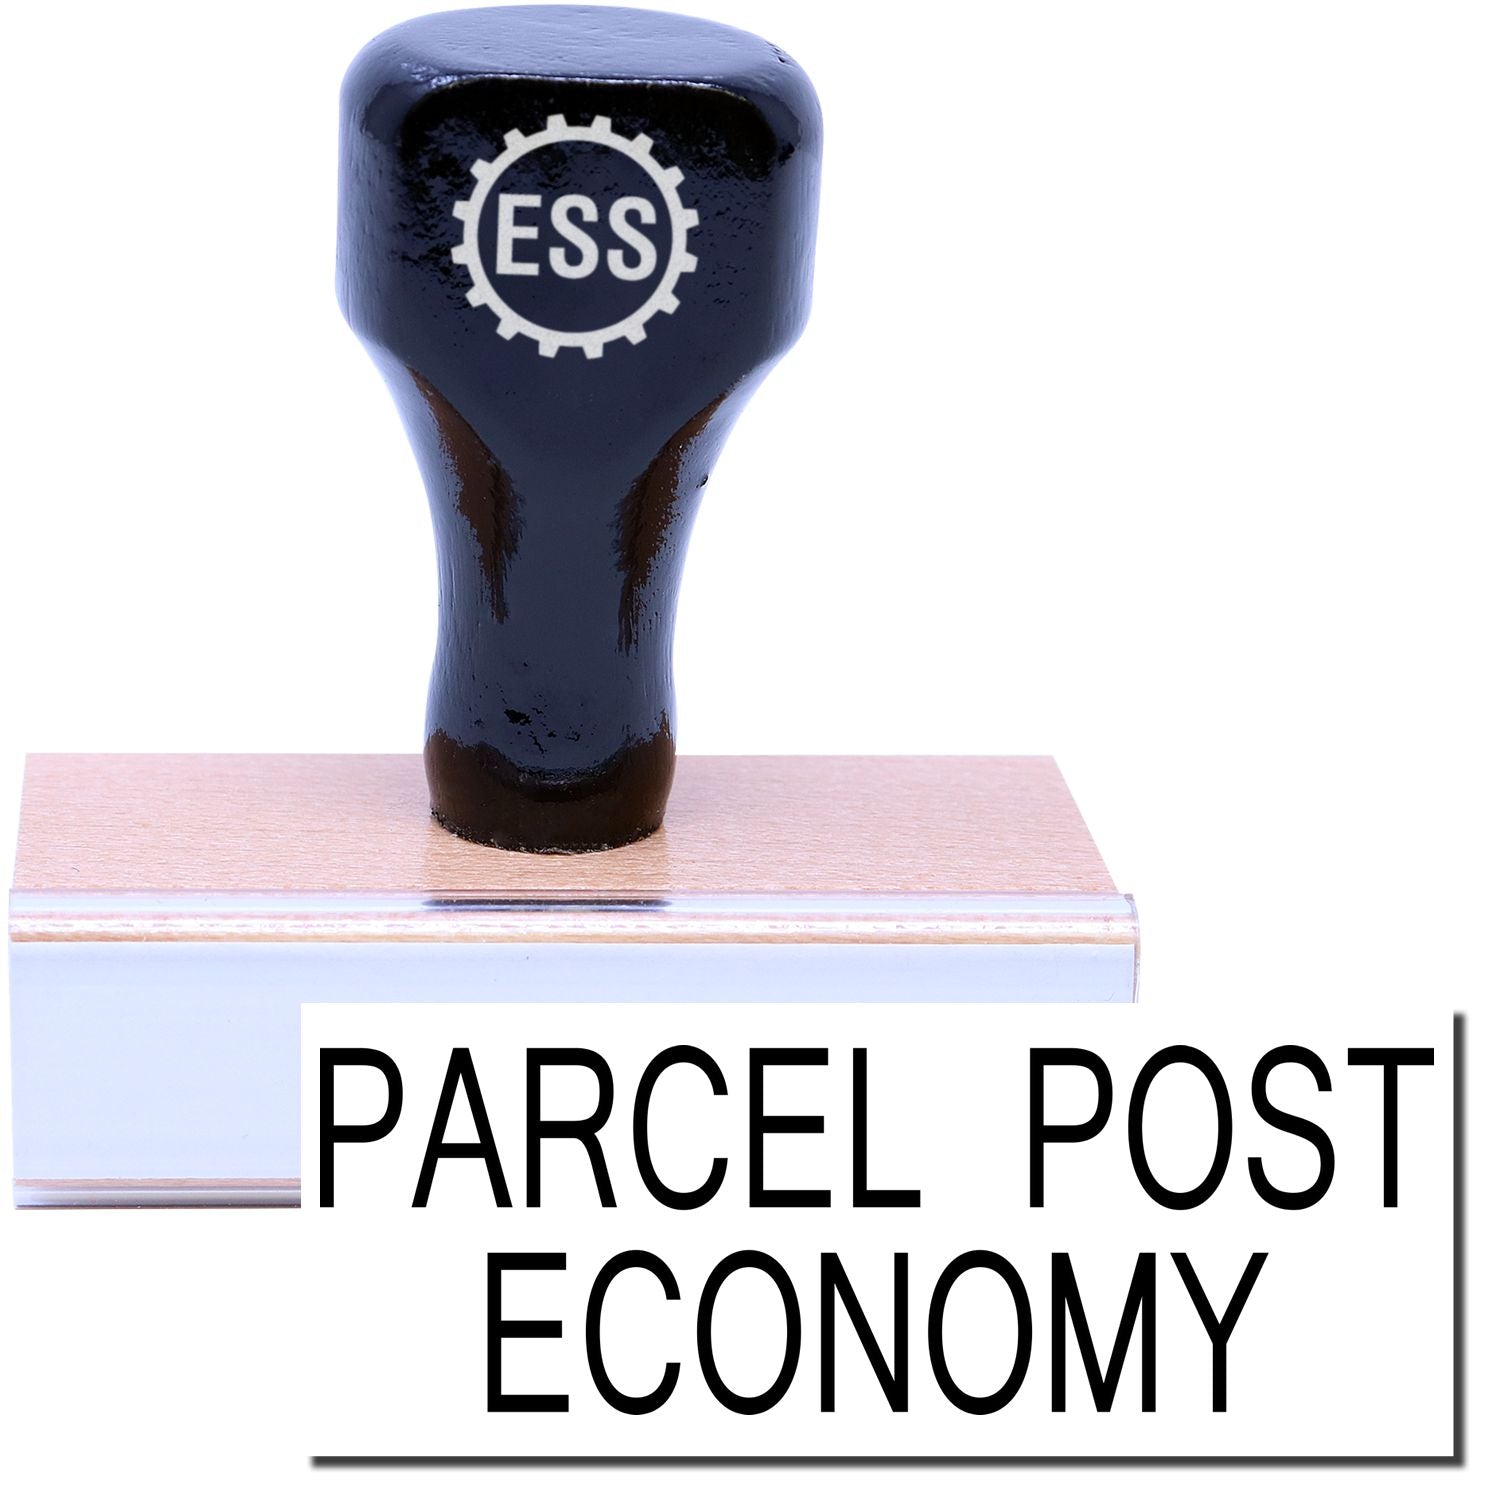 A stock office rubber stamp with a stamped image showing how the text "PARCEL POST ECONOMY" is displayed after stamping.